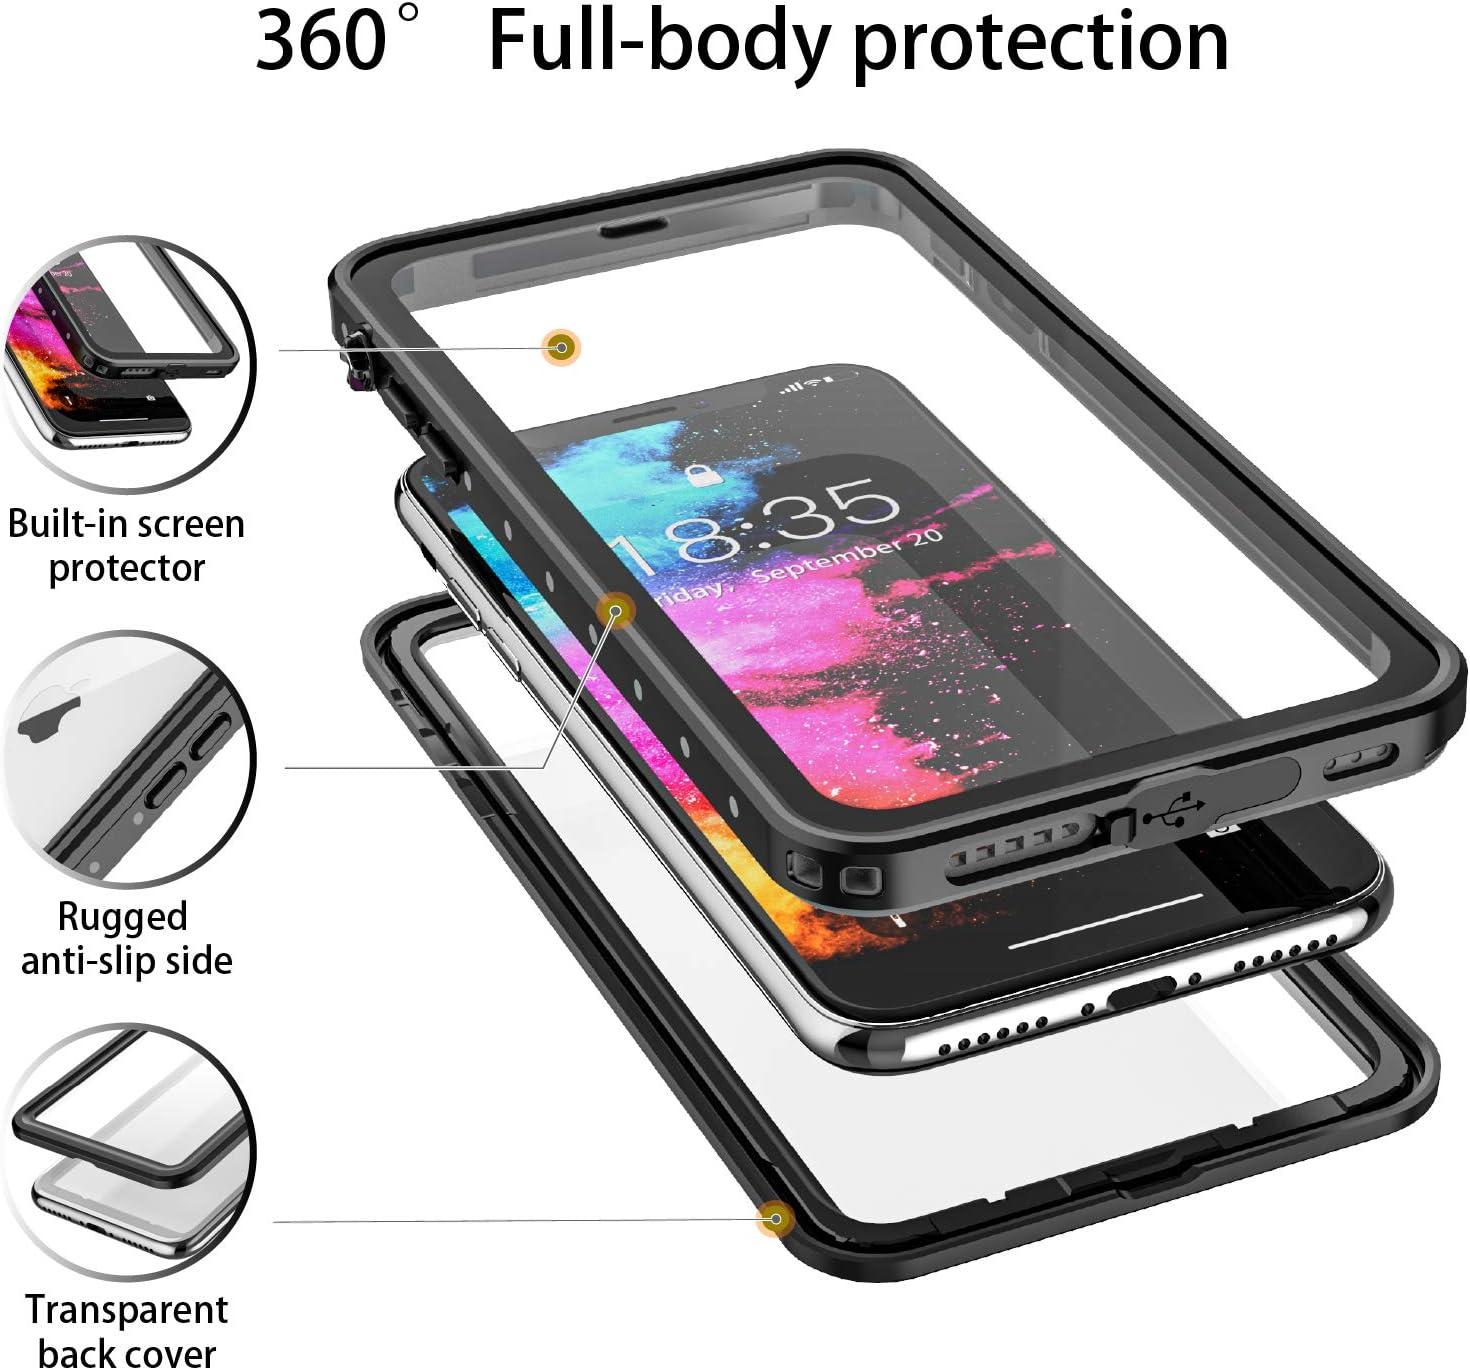 Waterproof Shockproof Dustproof Snowproof Case for iPhone X & Xs *Free Shipping*